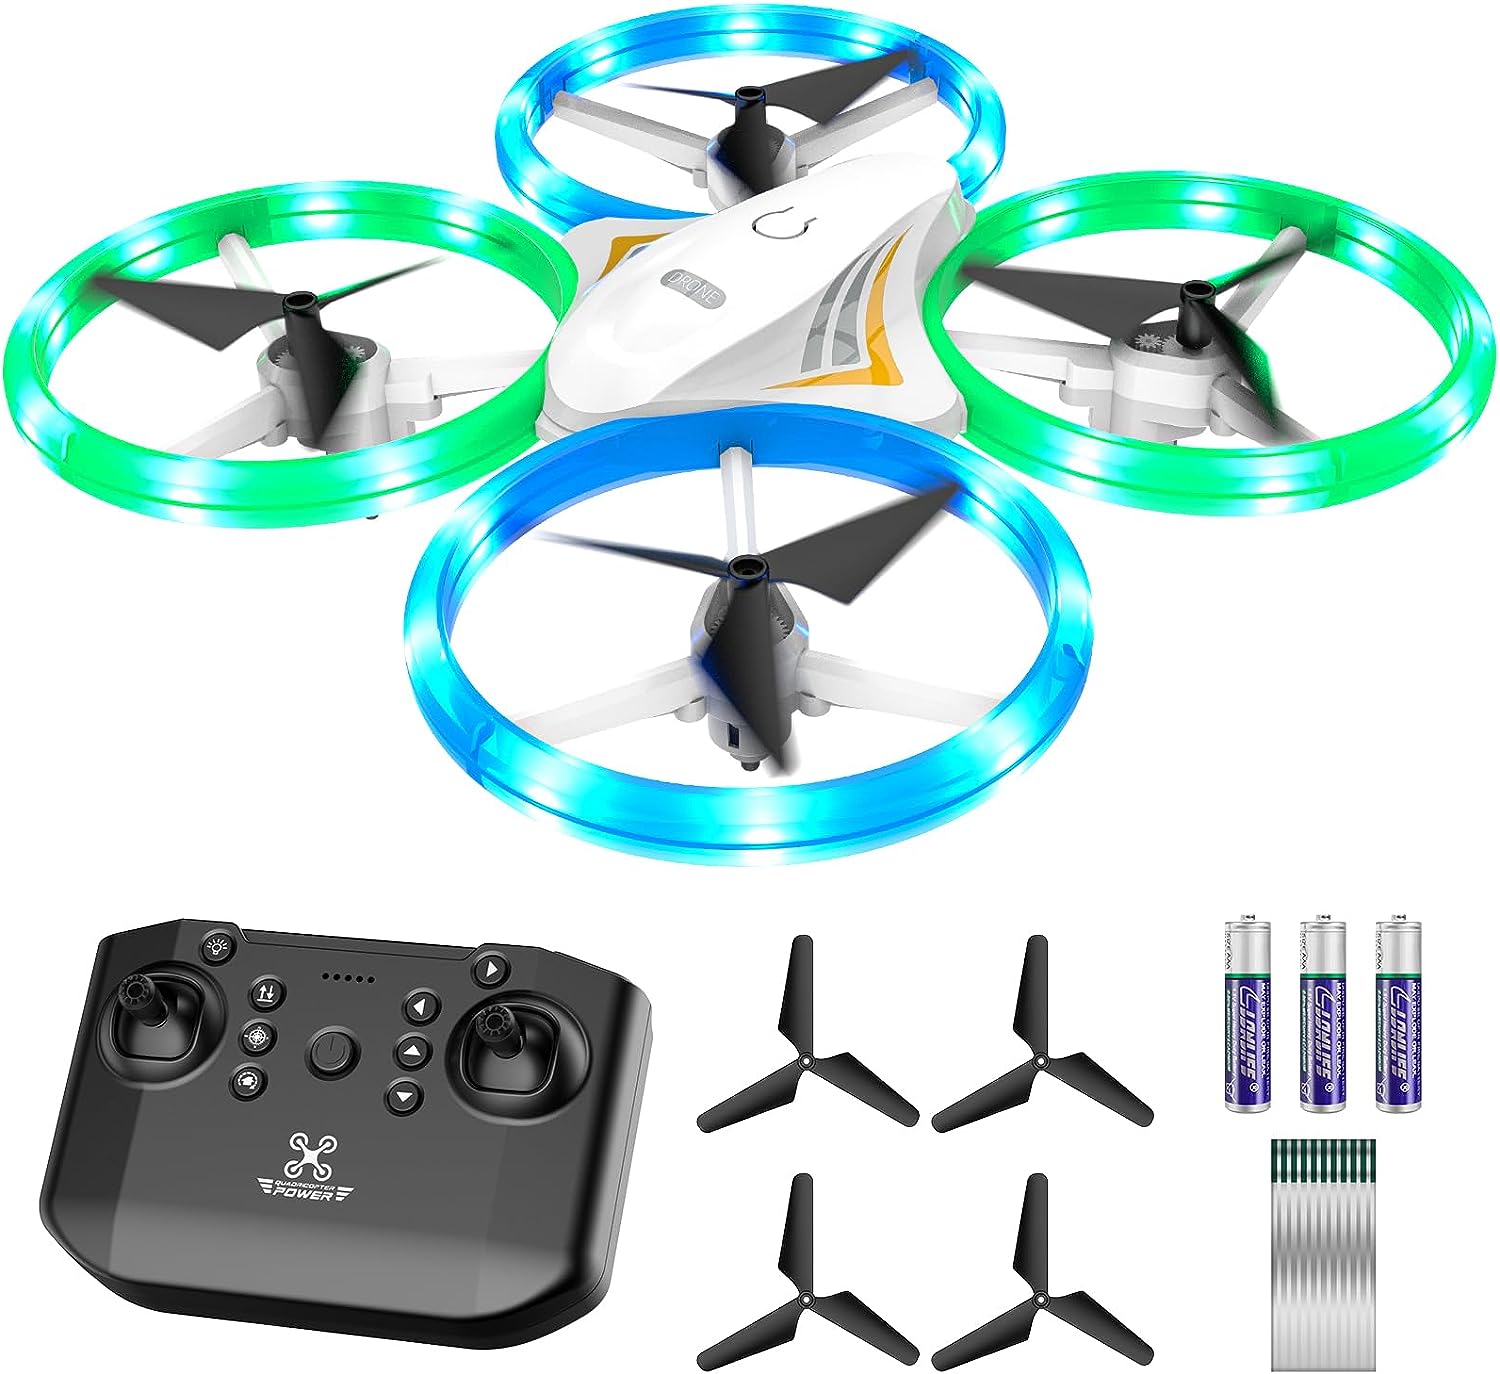 DyineeFy Mini Drone for Kids, Small Colorful Led Quadcopter with Altitude Hold, Headless Mode, 360° flip, and Auto Return Home, RC Drone Easy for Beginner Flying, Kids’ Gift Toy for Boys and Girls